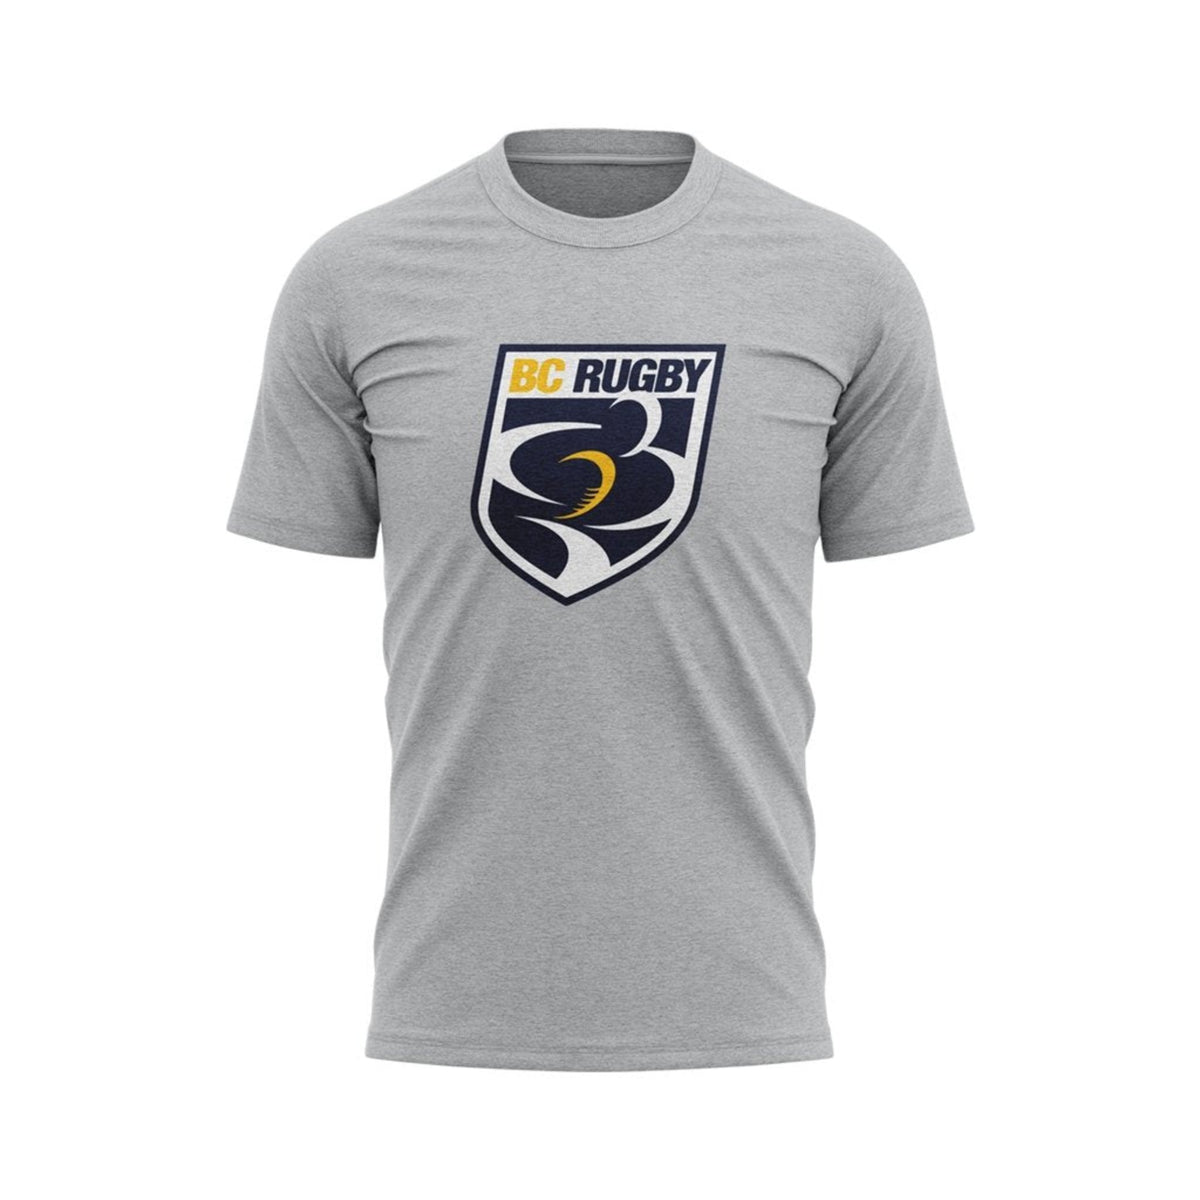 BC Rugby 2022 Shield Tee - www.therugbyshop.com www.therugbyshop.com MEN&#39;S / GREY - LARGE LOGO / S XIX Brands TEES BC Rugby 2022 Shield Tee